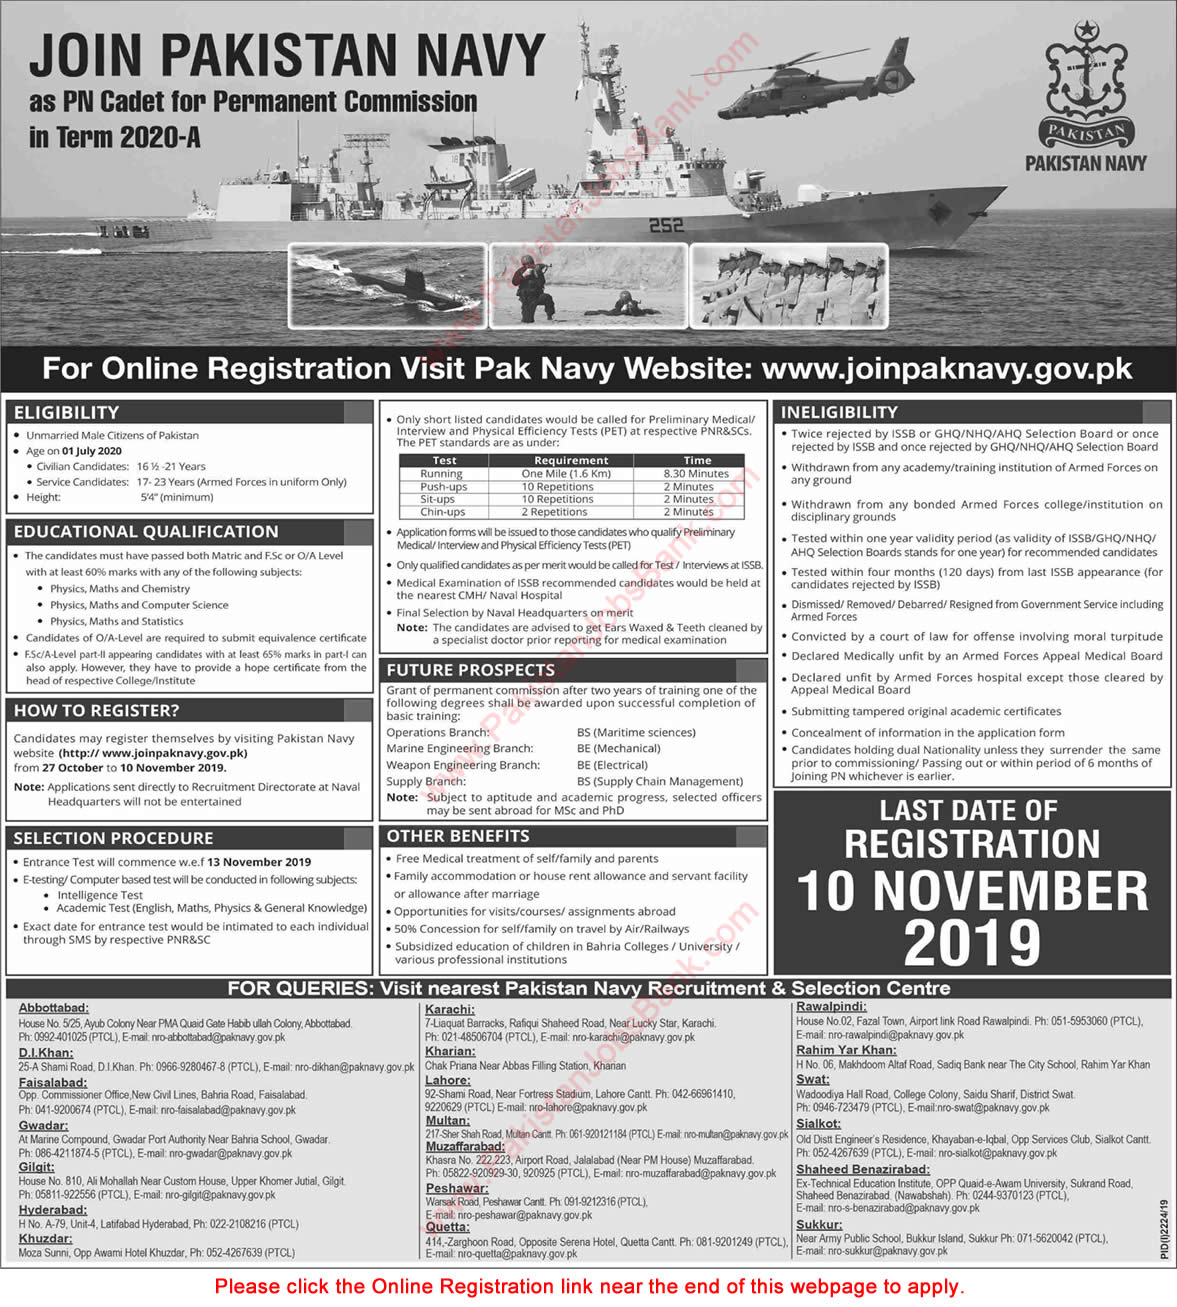 Join Pakistan Navy as PN Cadet October 2019 November Online Registration for Permanent Commission in Term 2020-A Latest